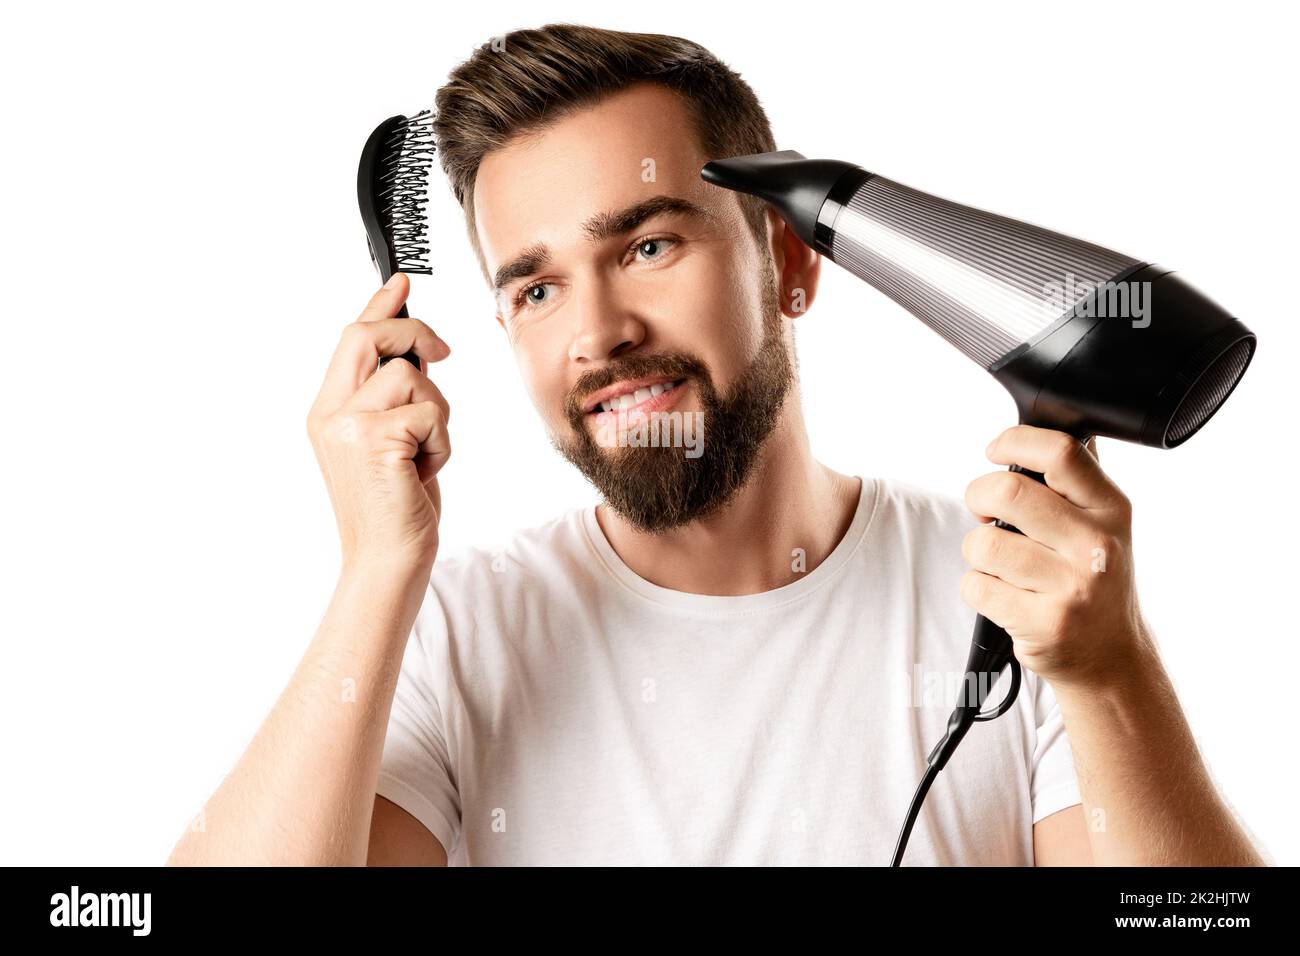 Handsome man is using hair brush and hairdryer for his hairstyle Stock Photo